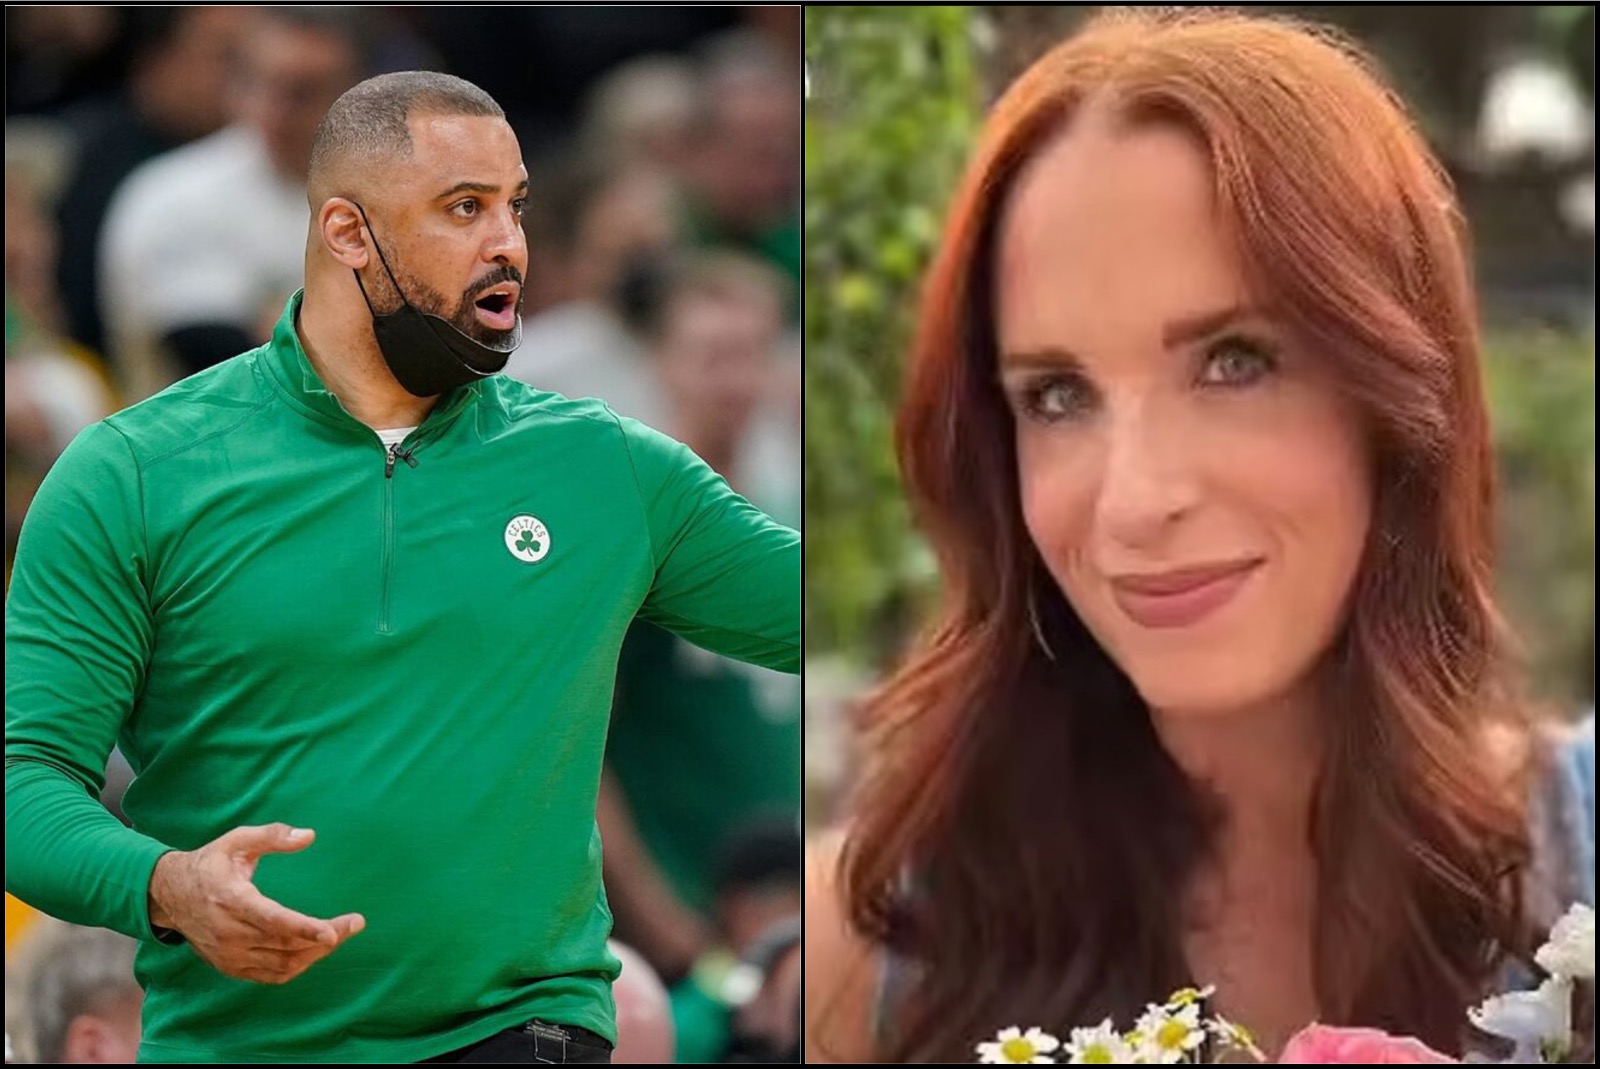 Kathleen Nimmo Lynch IDed as Married Mother of 3 Who Had Affair With Celtics  Coach Ime Udoka – BlackSportsOnline